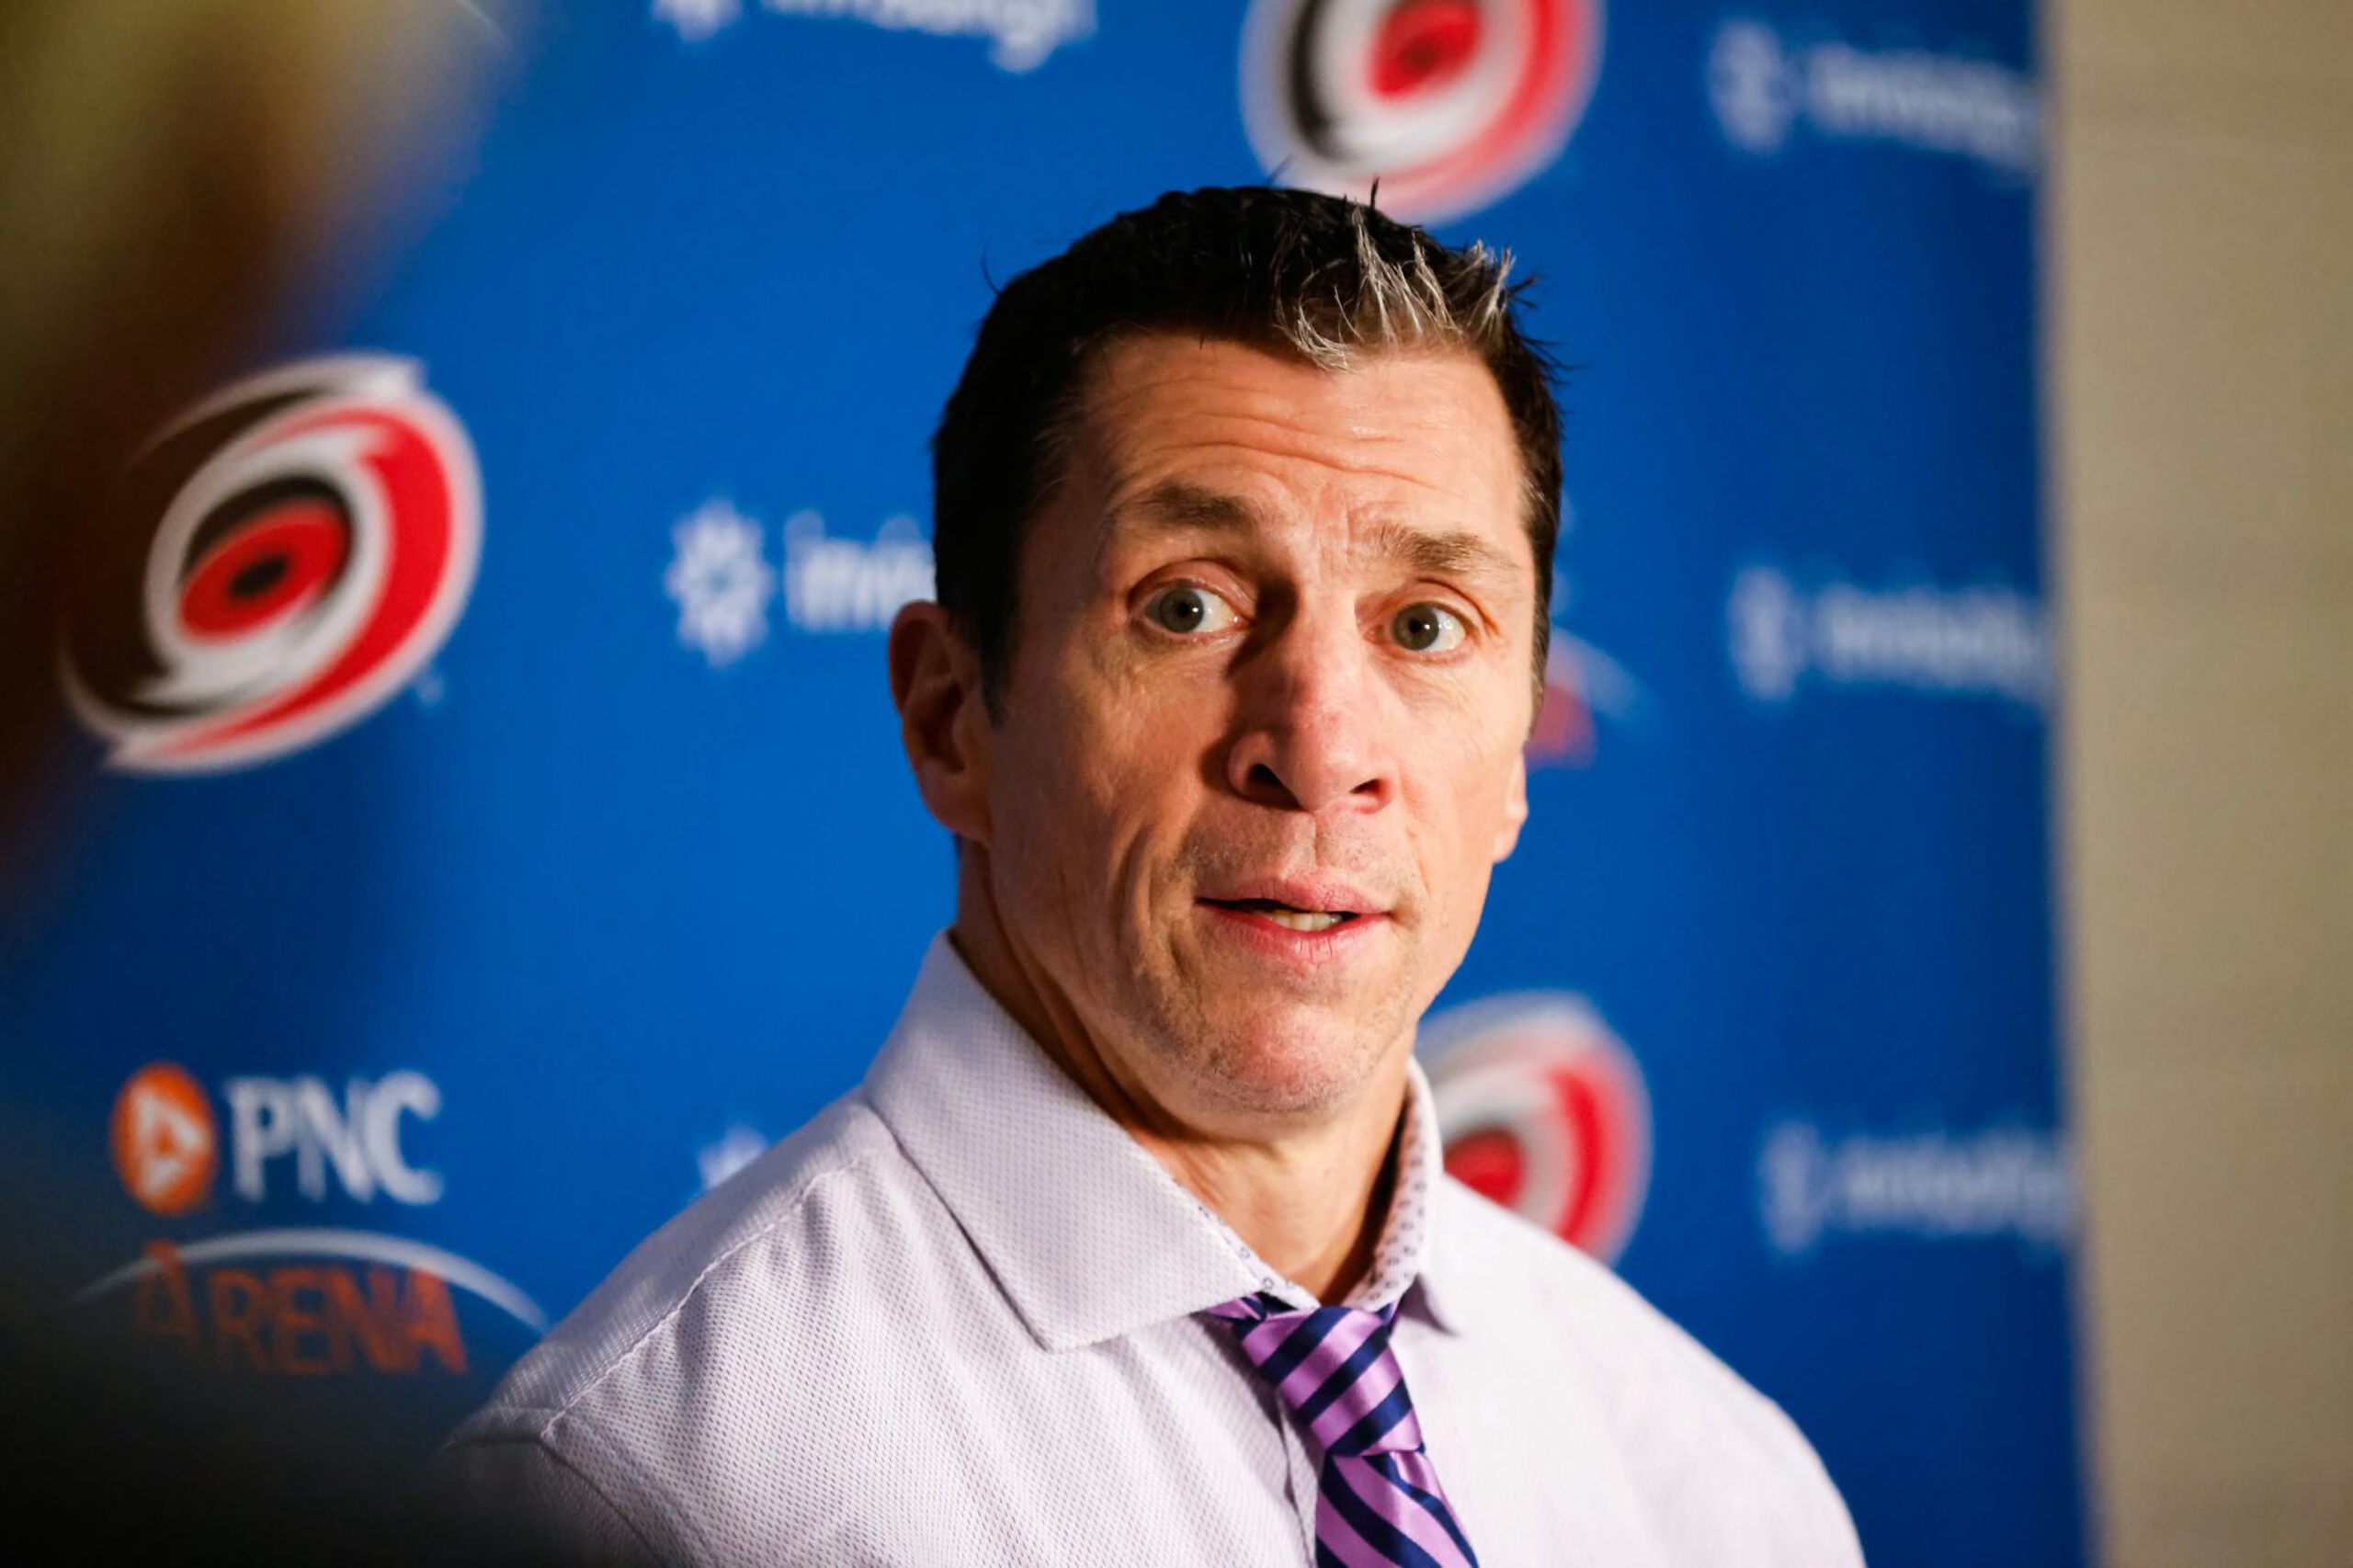 Rod Brind'Amour (@canes) becomes only the second Head Coach in